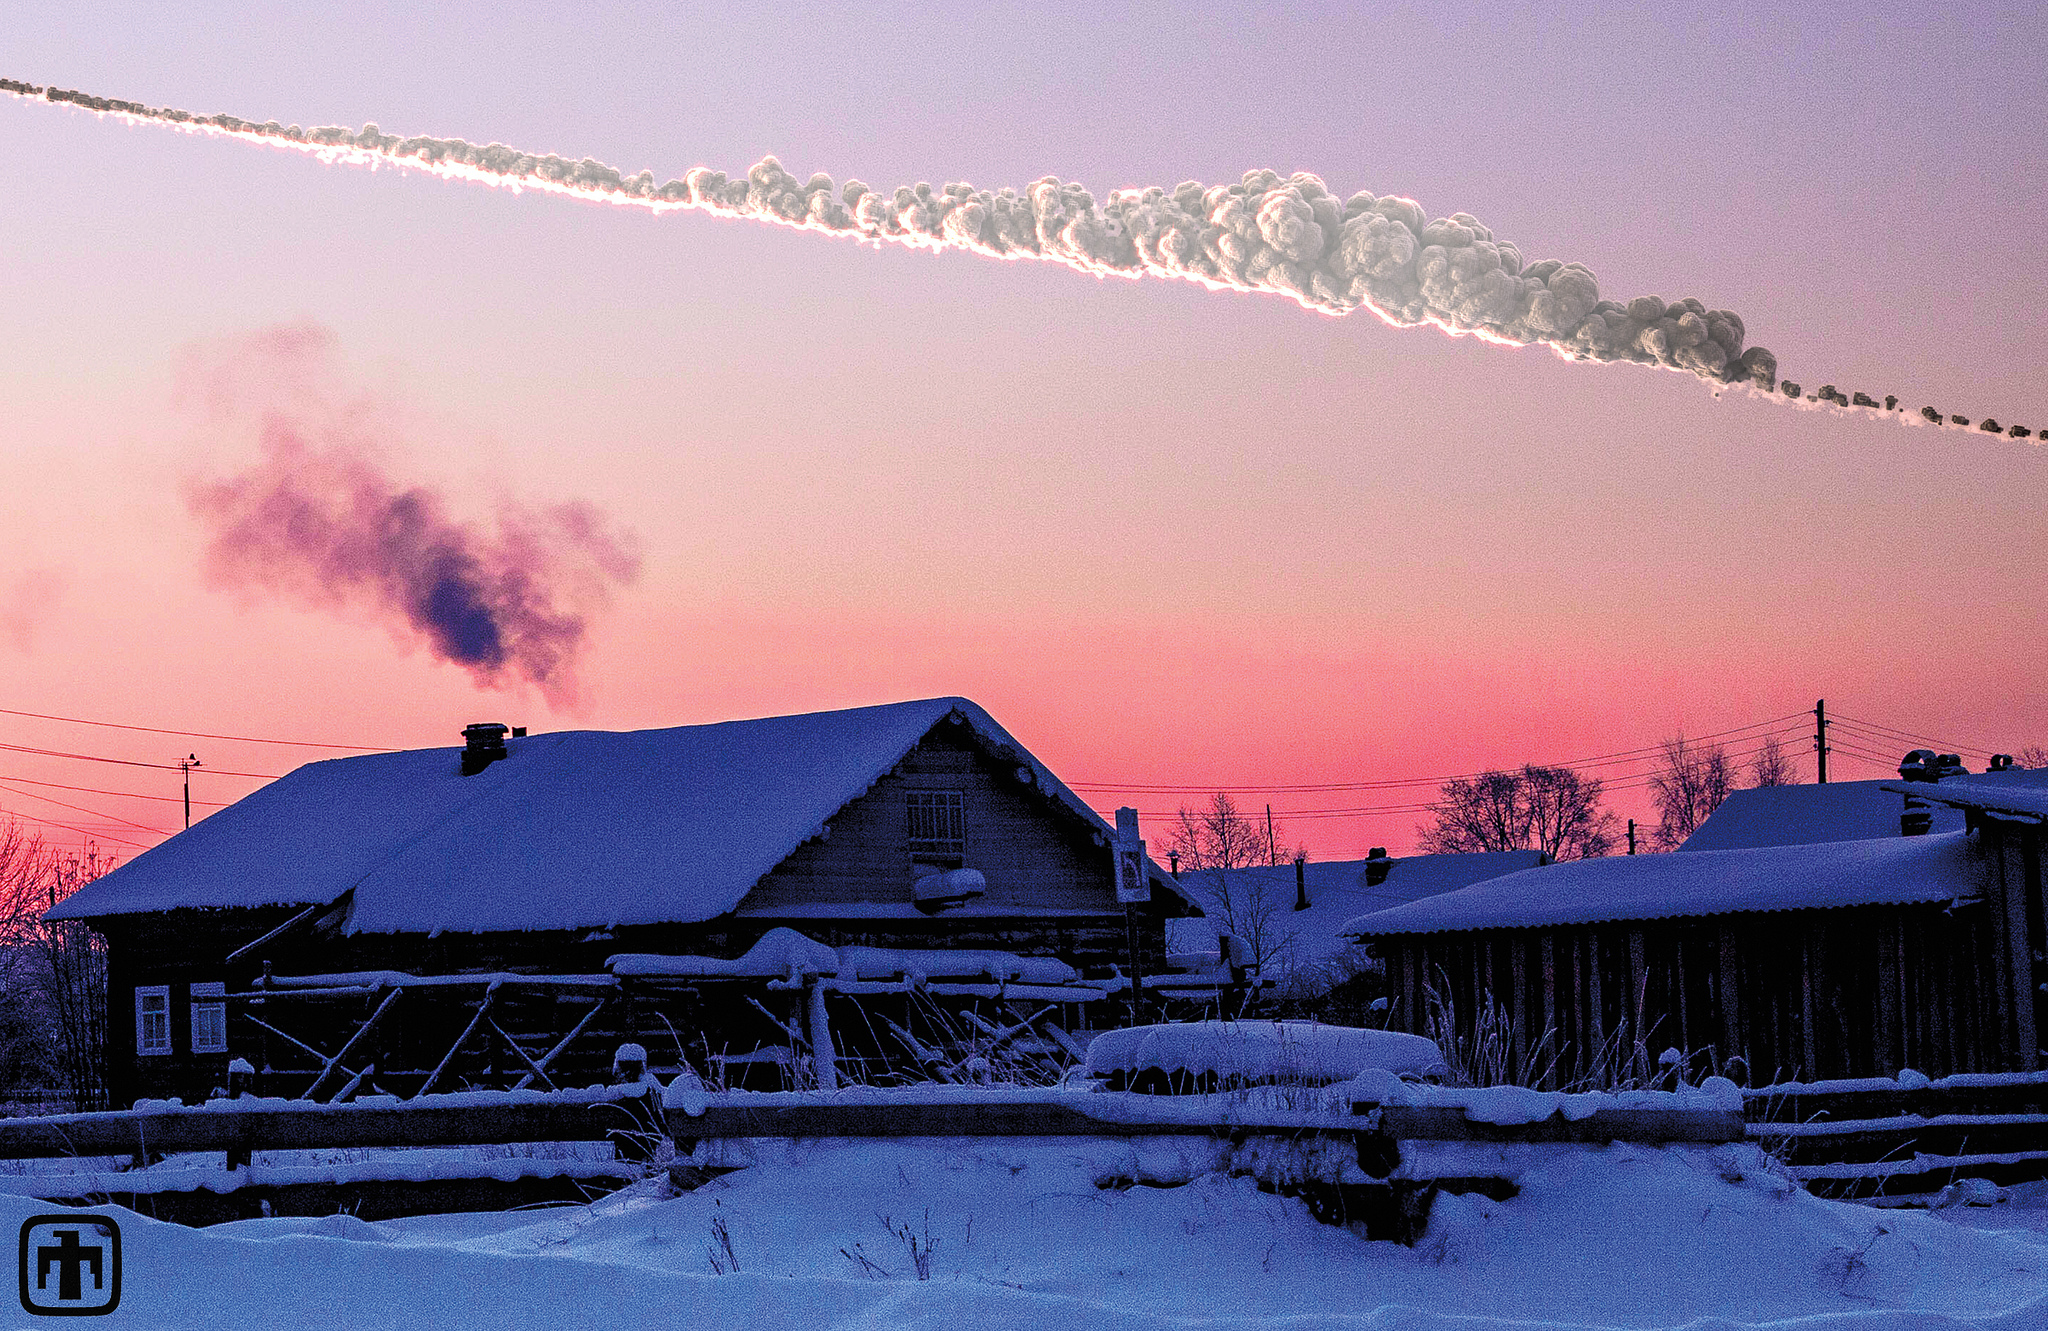 Incoming! New Warning System Tracks Potentially Dangerous Asteroids